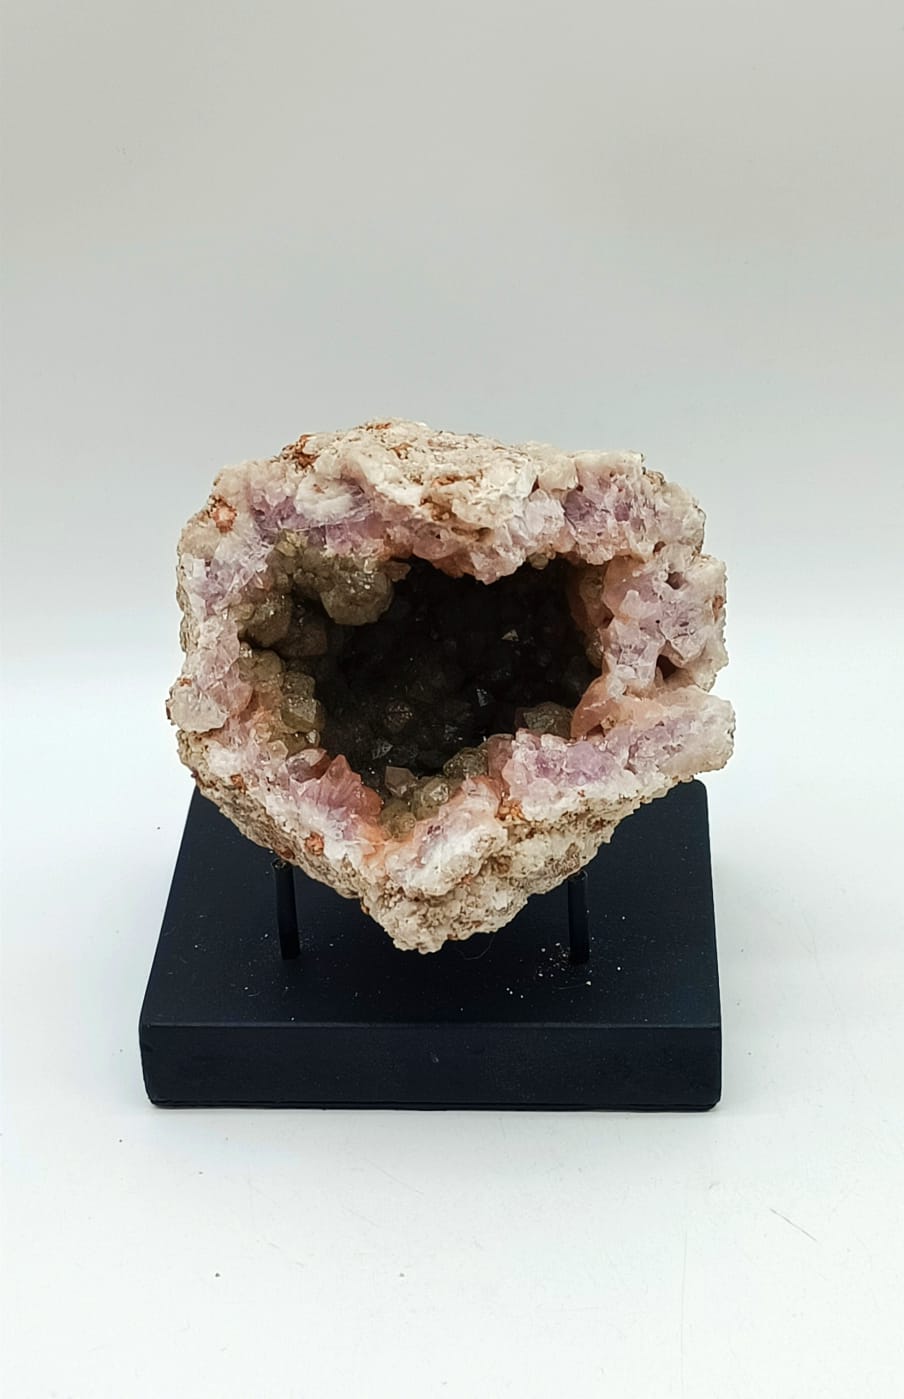 Rare Pink Amethyst Geode AAA From Argentina 585g 105mm x 80mm Crystal Wellness